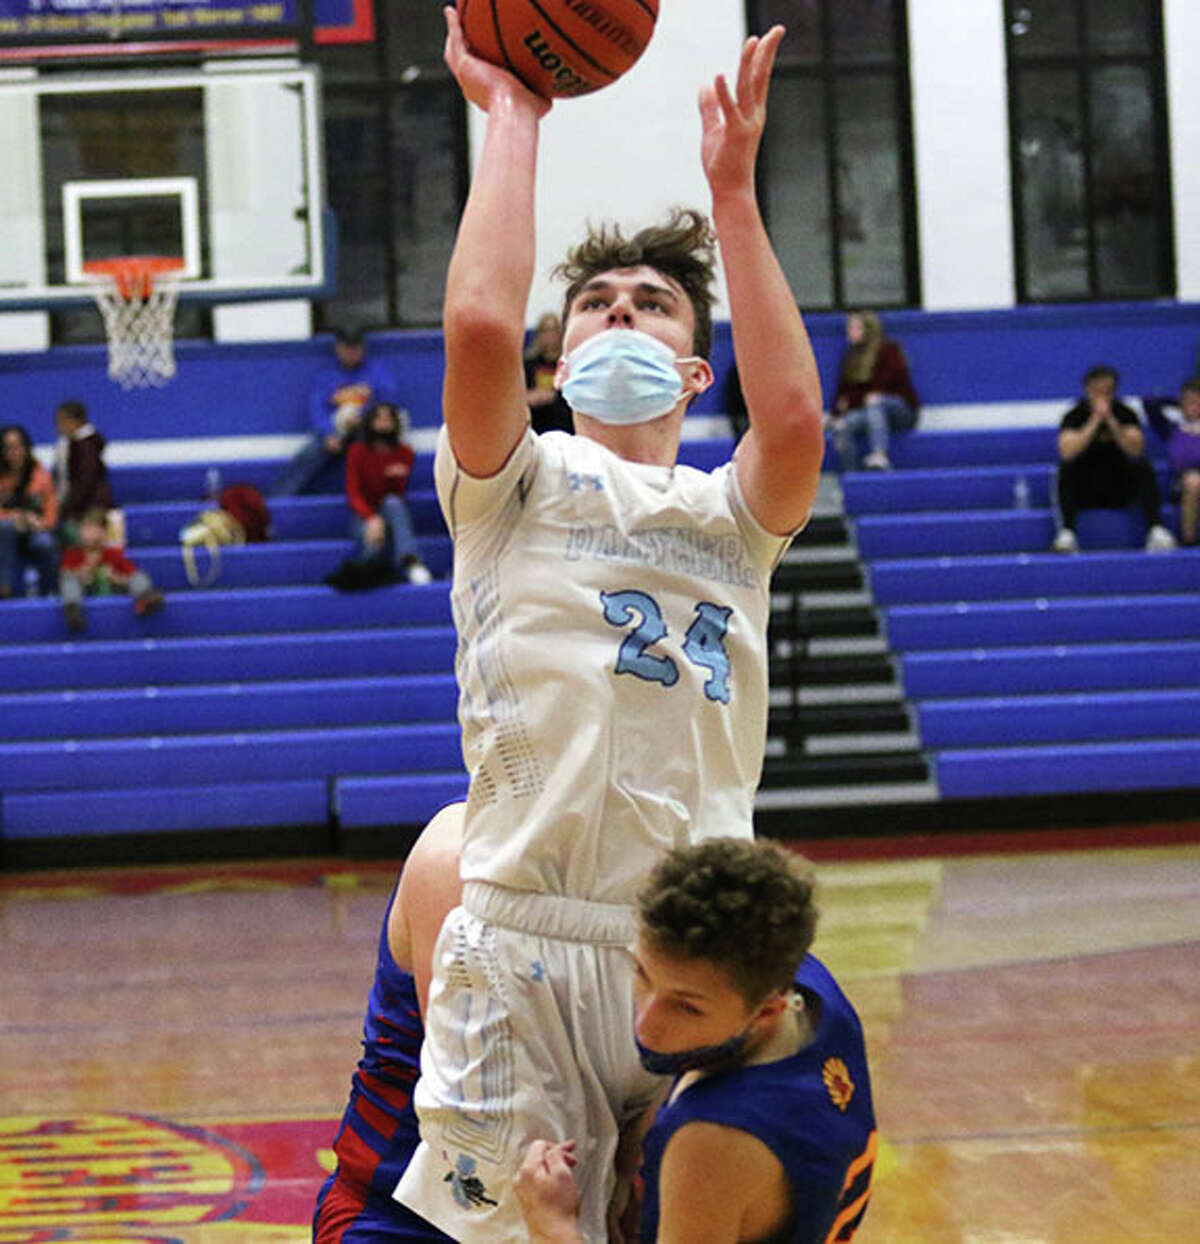 Jersey's Ayden Kanallakan (24) puts up a shot in the lane that is waved off with a charging call drawn by Roxana's Nolan Tolbert in a Monday game at the Roxana Tourney. On Wednesday, Kanallakan 13 points in another Jersey win in the tournament.